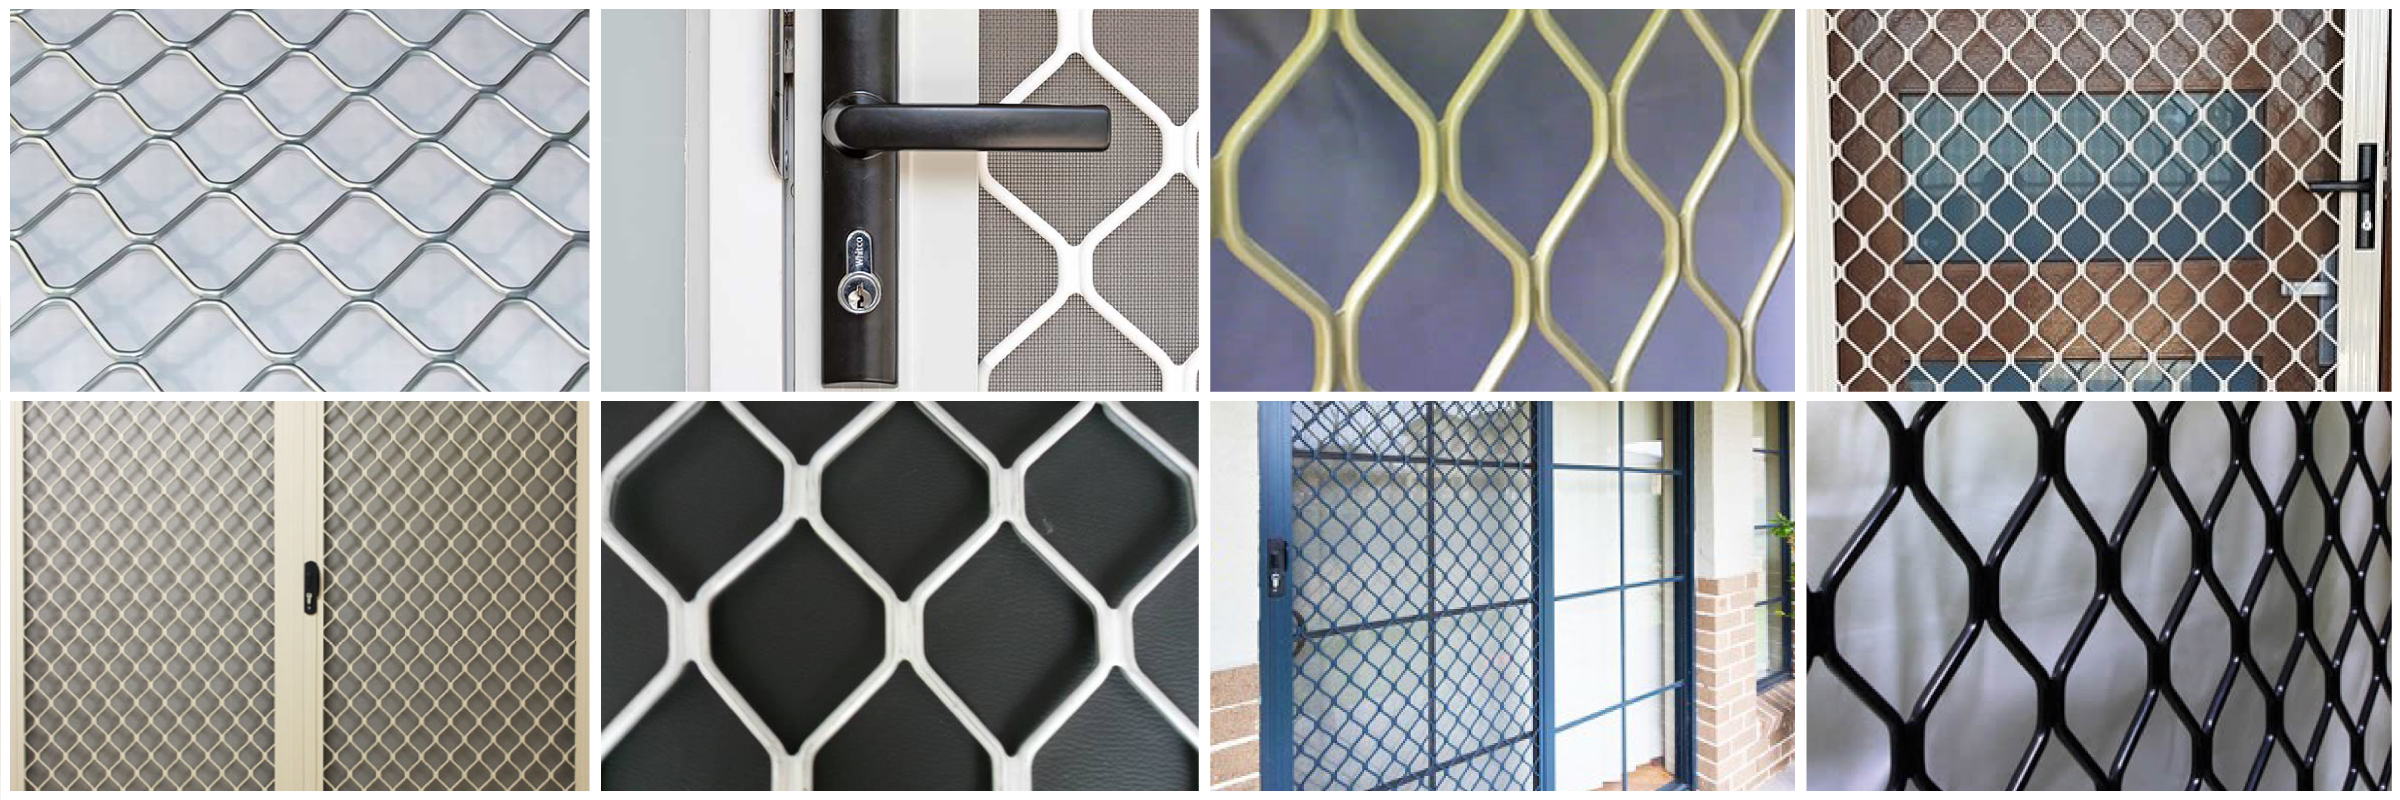 Strong and functional security doors